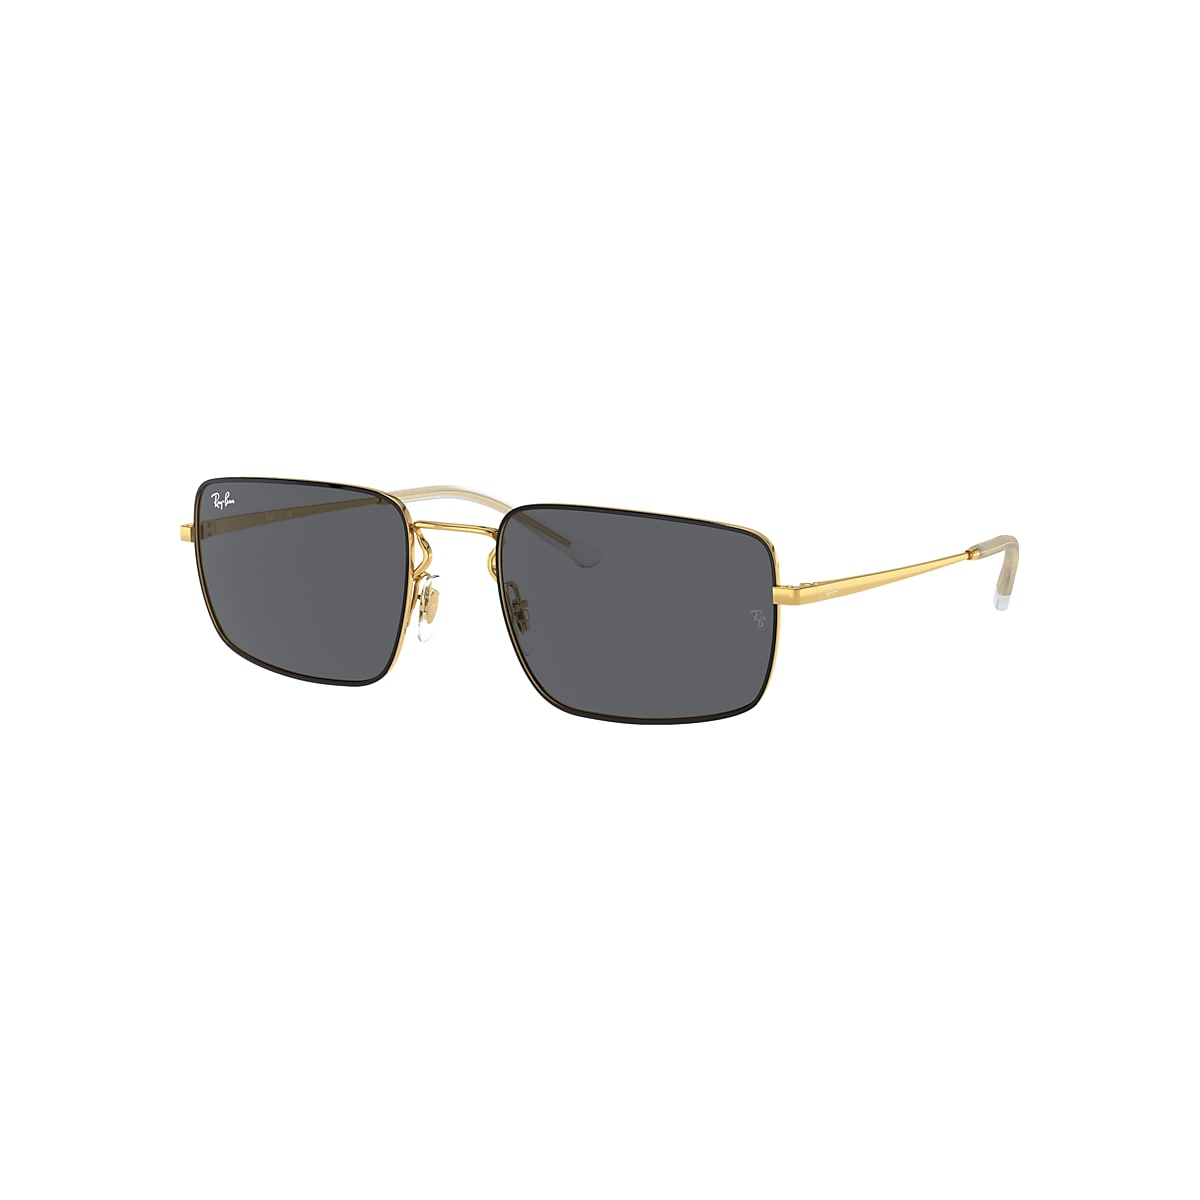 Rb3669 Sunglasses in Black On Gold and Grey | Ray-Ban®